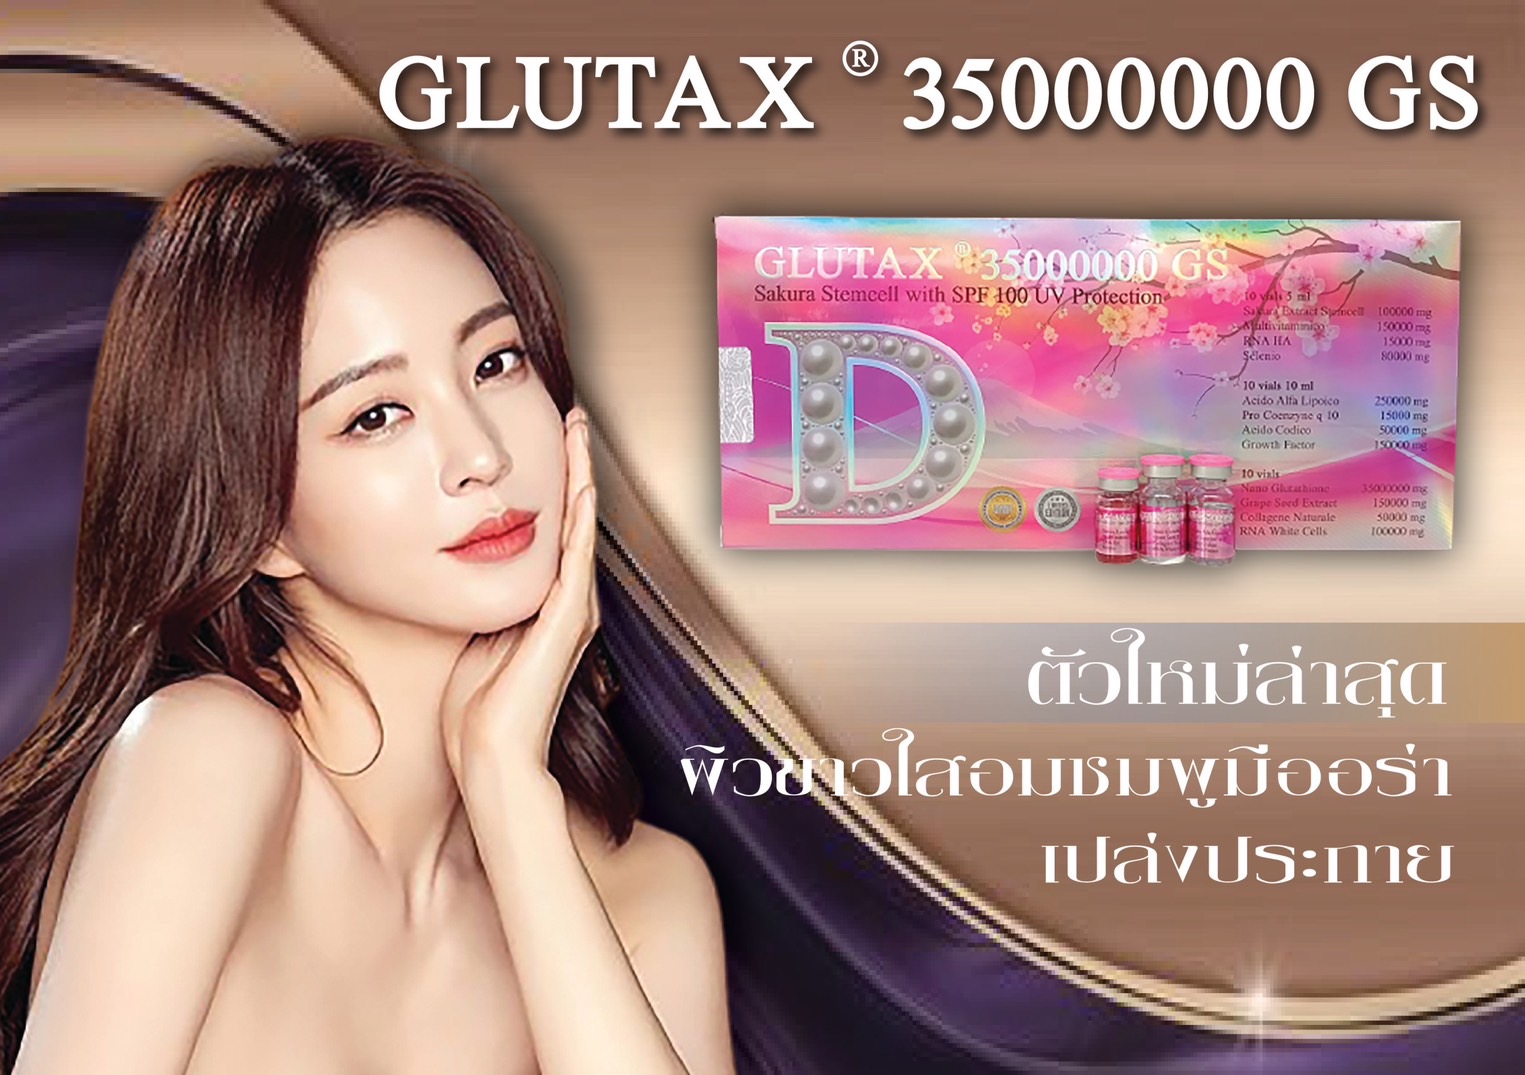 GLUTAX 35000000GS SAKURA STEMCELL WITH SPF 100 UV PROTECTION GLUTATHIONE SKIN WHITENING INJECTION by www.ccthaitown.com